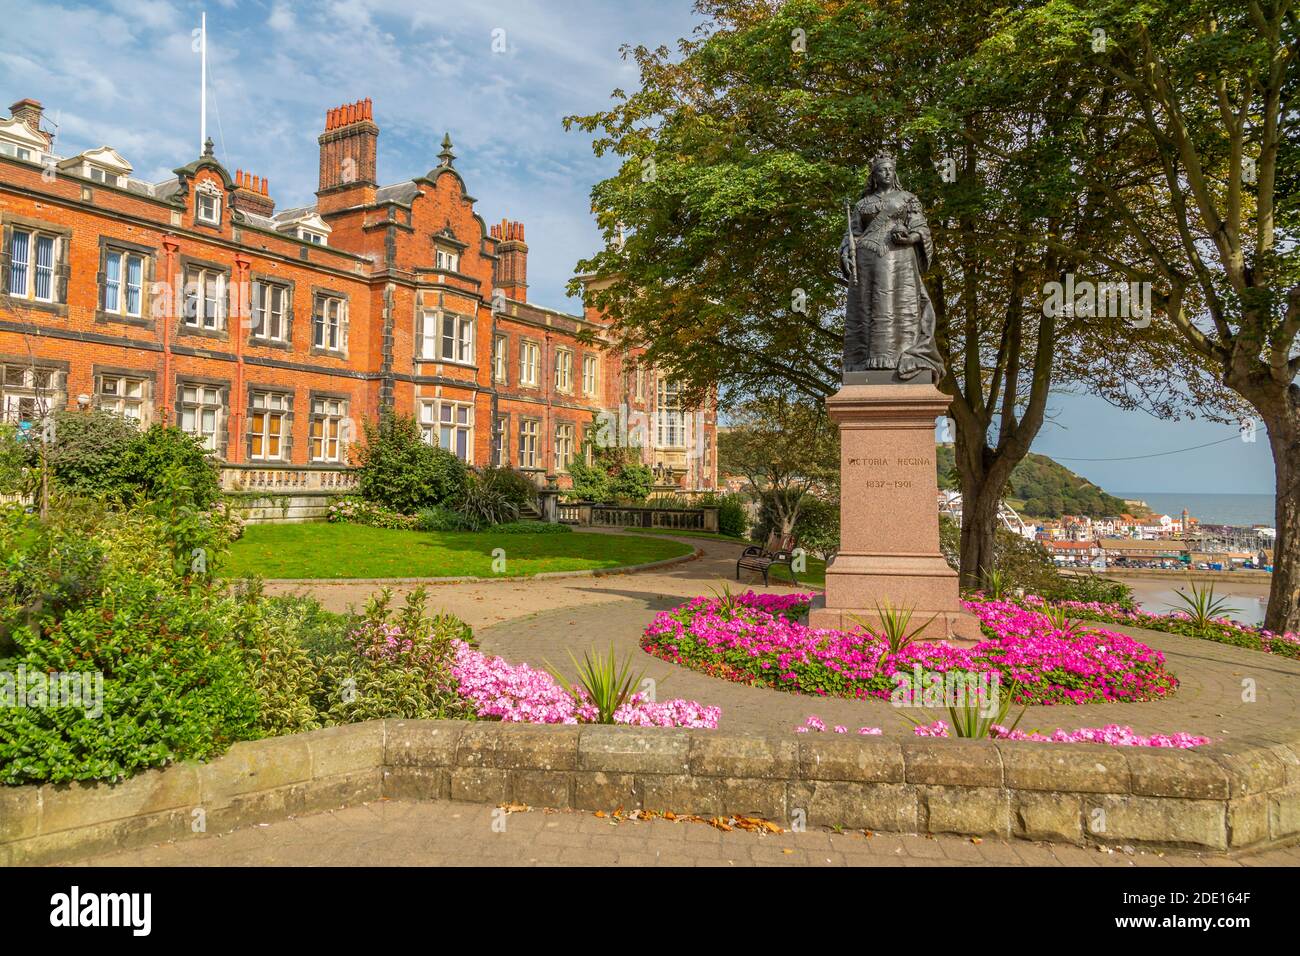 View of Queen Victoria statue and council building, Scarborough, North Yorkshire, Yorkshire, England, United Kingdom, Europe Stock Photo